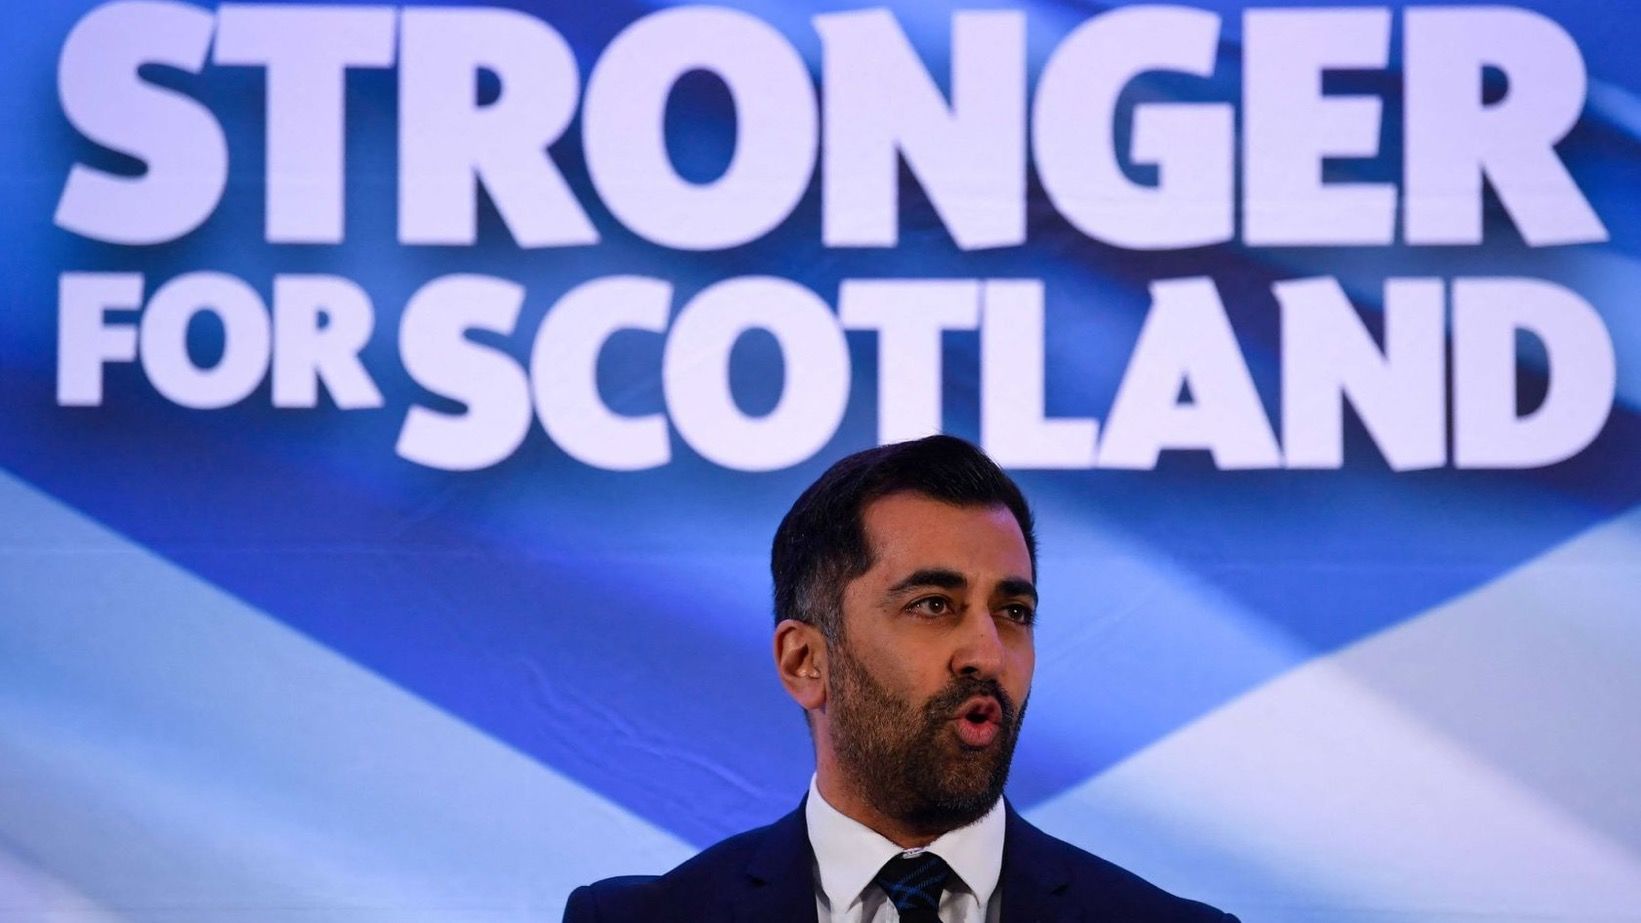 UK: Humza Yousaf replaces Nicola Sturgeon as SNP leader and first minister in Scotland